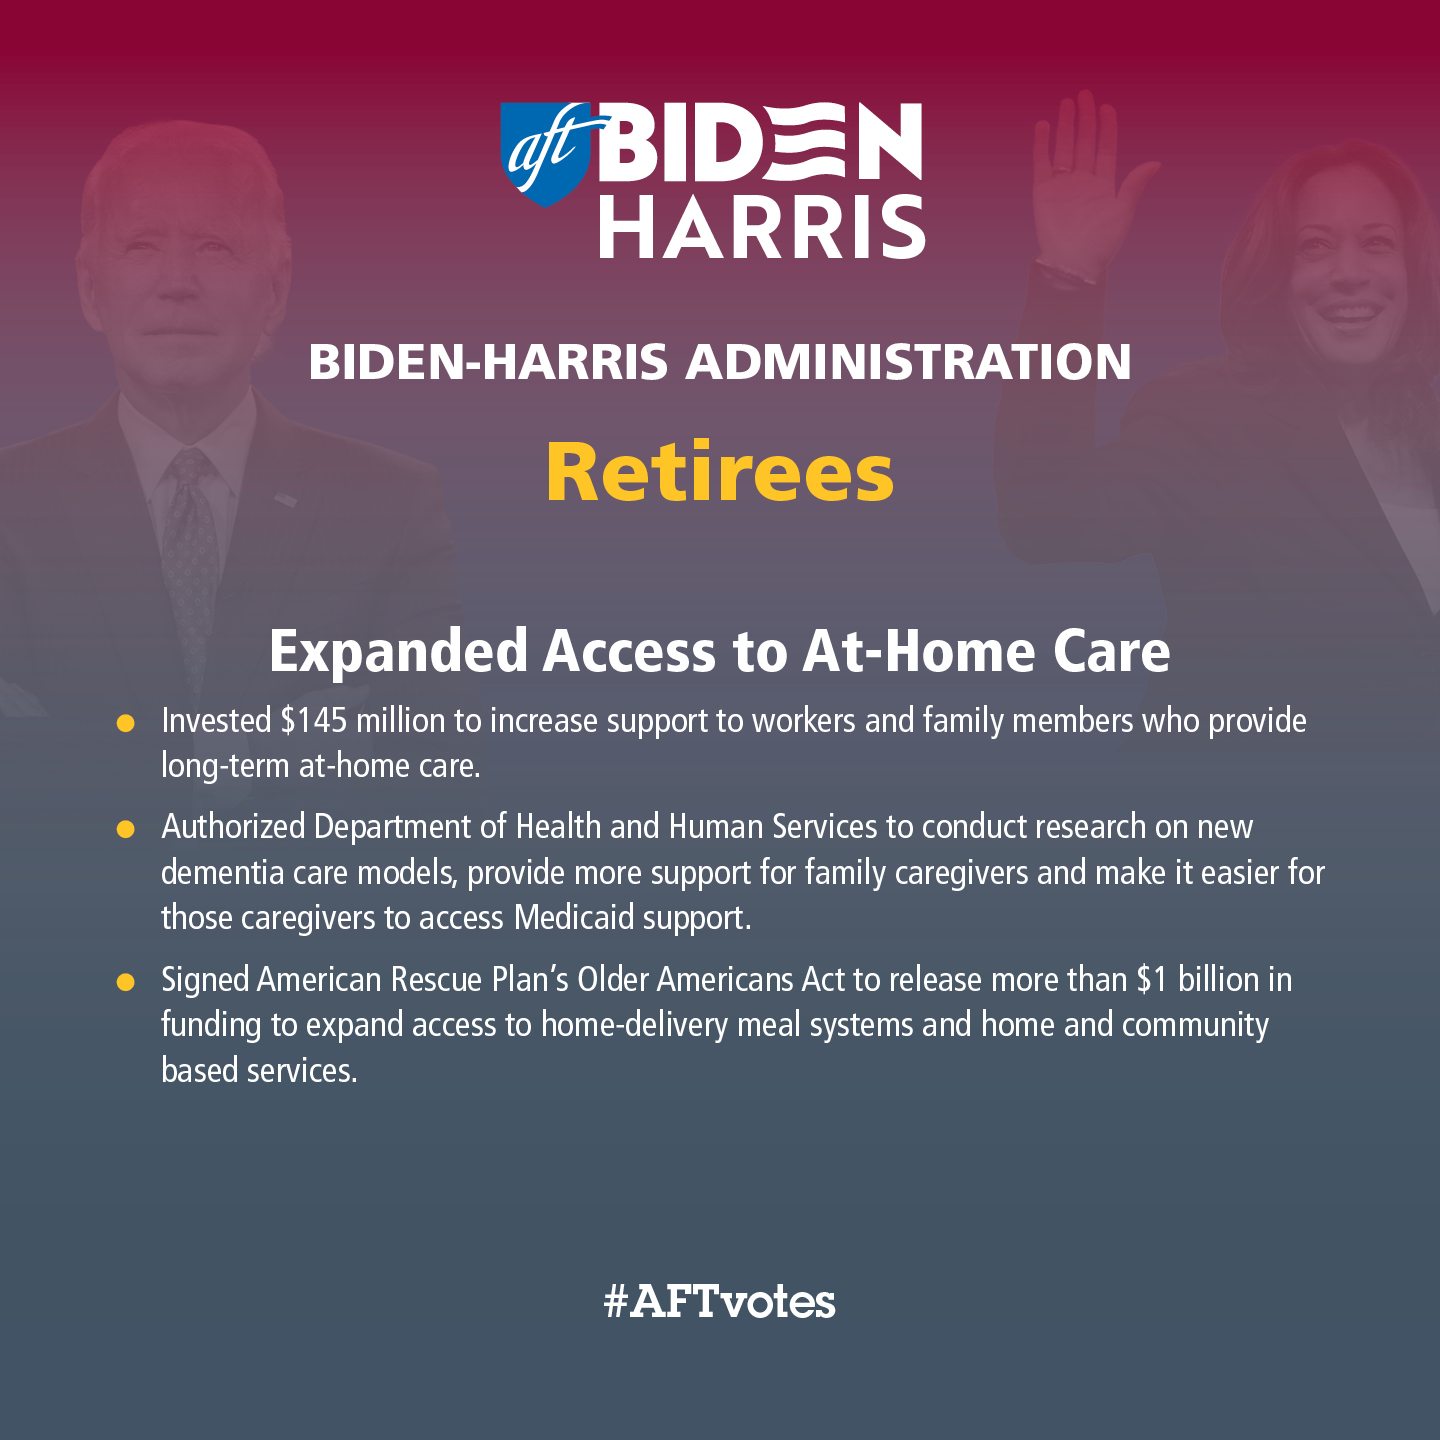 Expanded Access to At-Home Care